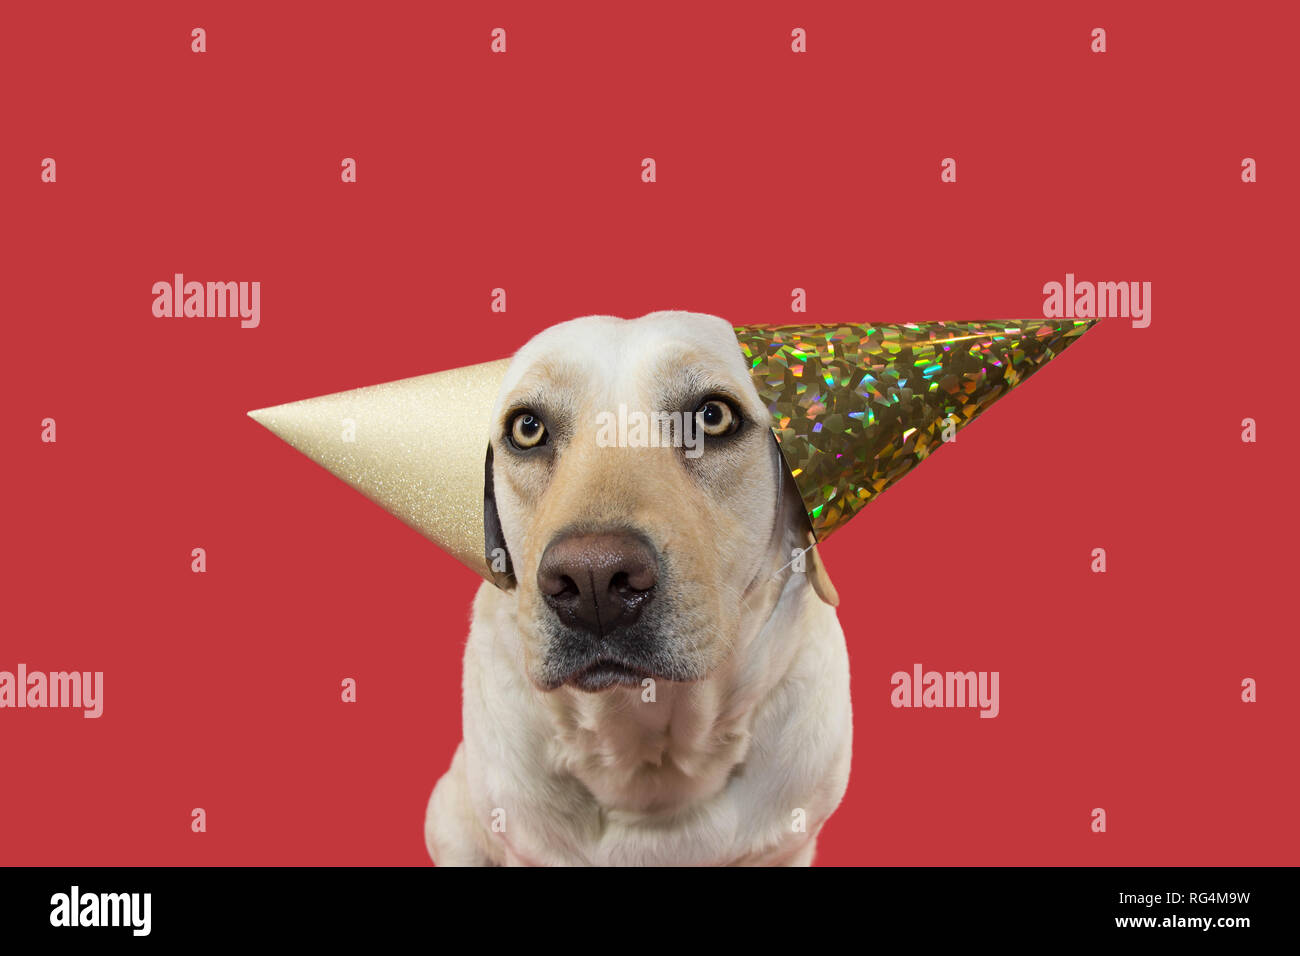 FUNNY DOG CELEBRATING A BIRTHDAY, CARNIVAL, MARDI GRAS OR NEW YEAR PARTY.  WEARING TWO GLITTER GOLDEN HAT. ISOLATED SHOT AGAINST CORAL BACKGROUND  Stock Photo - Alamy